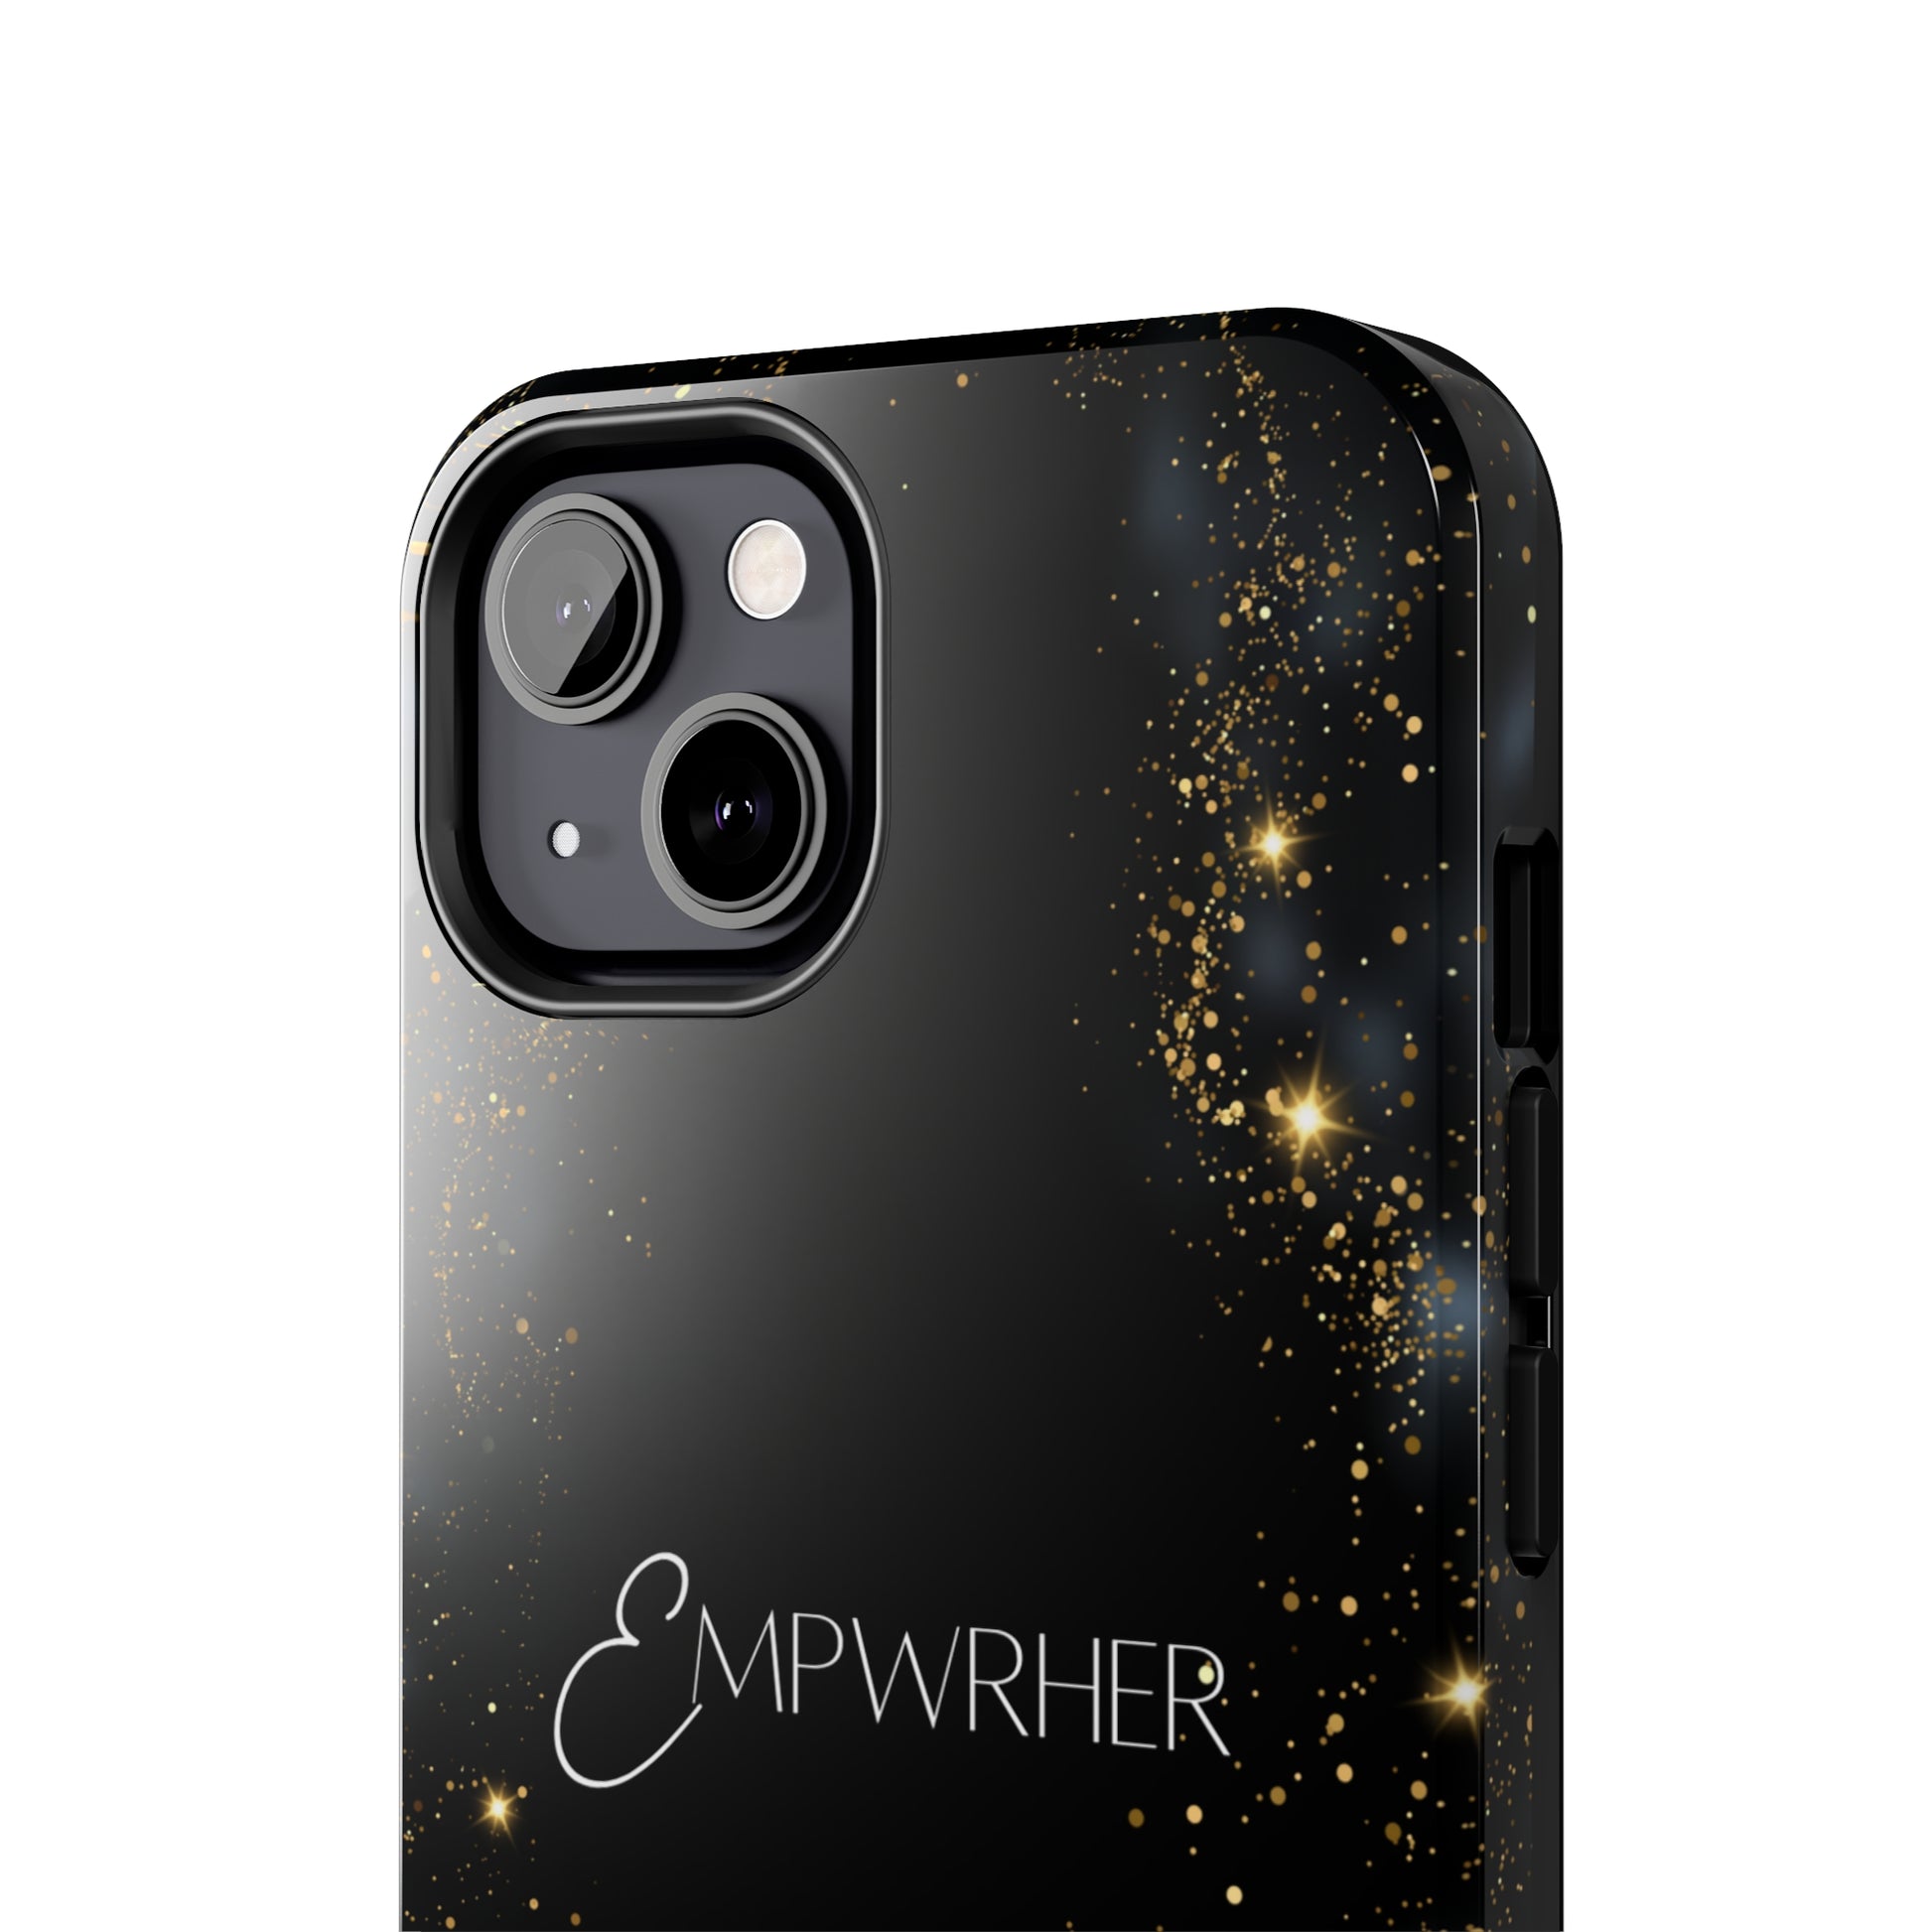 EMPWRHER Black Gold - Custom Phone Case, Impact-Resistant Polycarbonate Shell, Wireless Charging, iPhone 7, 8, X, 11, 12, 13, 14 & more. Printify